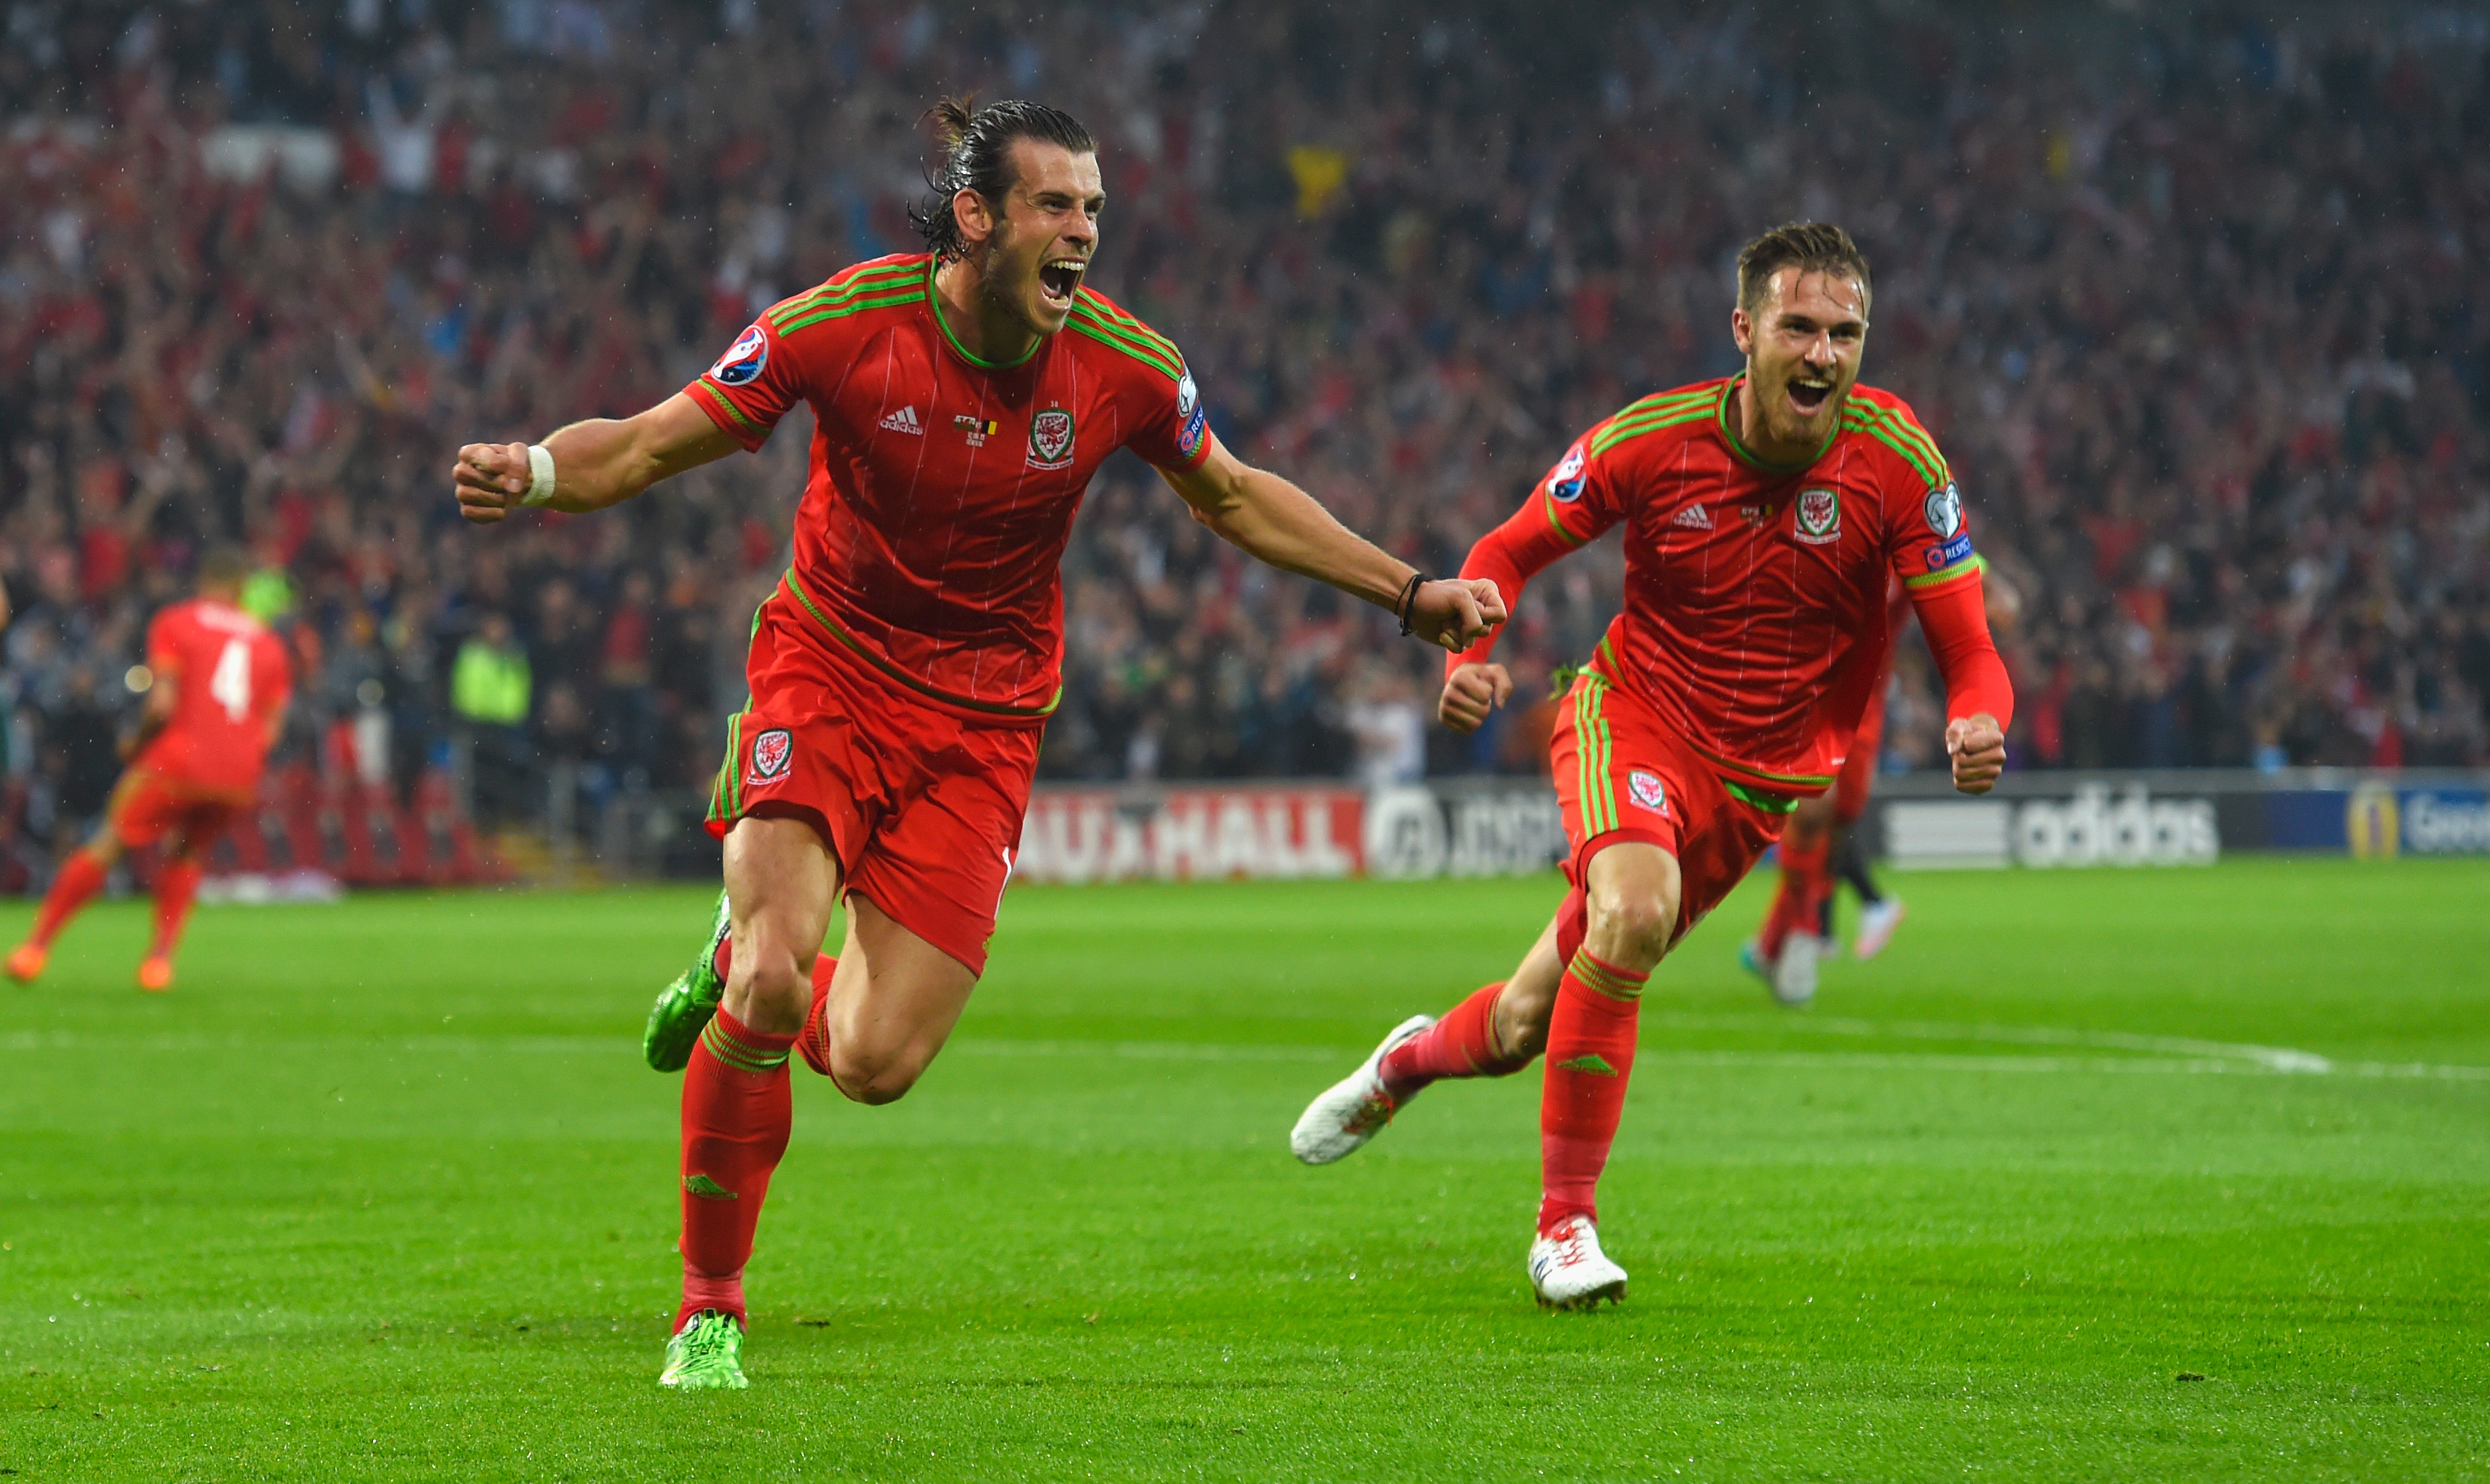 Wales | The land of brave warriors, poets, and Gareth Bale